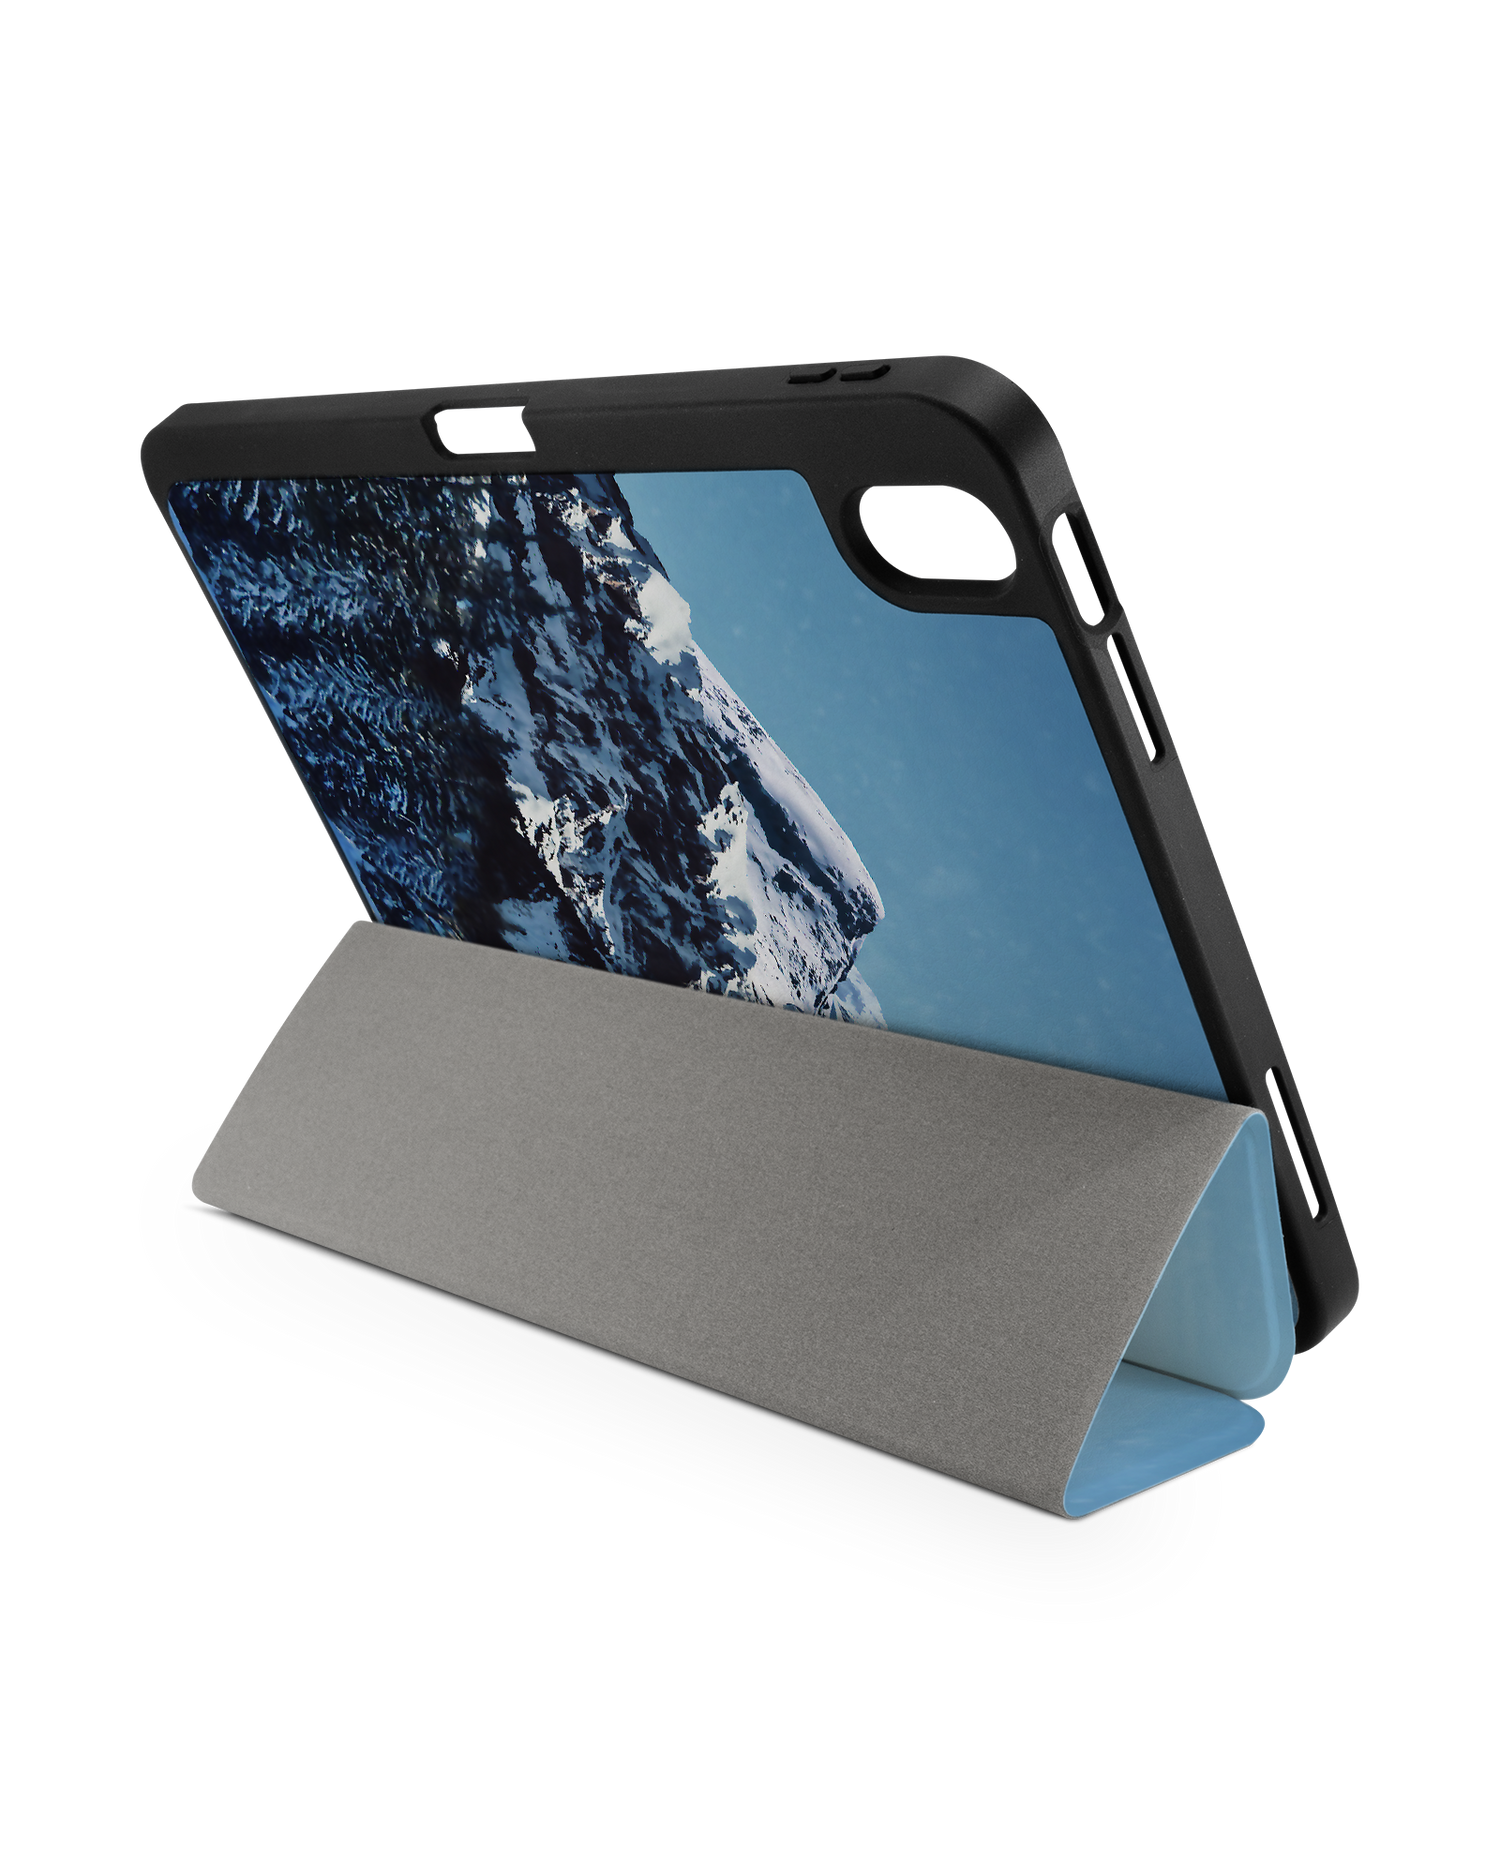 Winter Landscape iPad Case with Pencil Holder for Apple iPad (10th Generation): Set up in landscape format (back view)